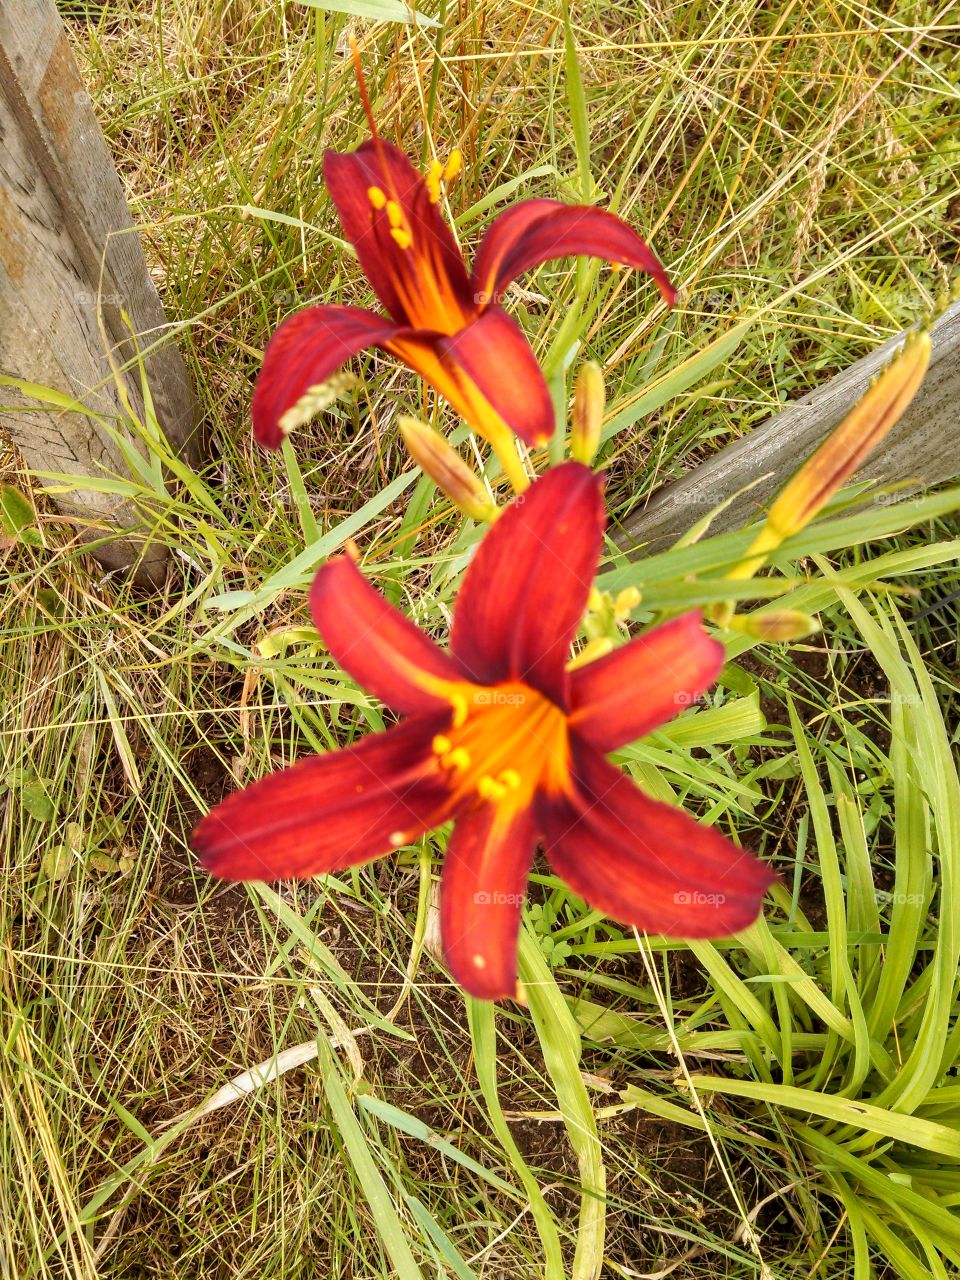 Tiger Lillies. From my backyard